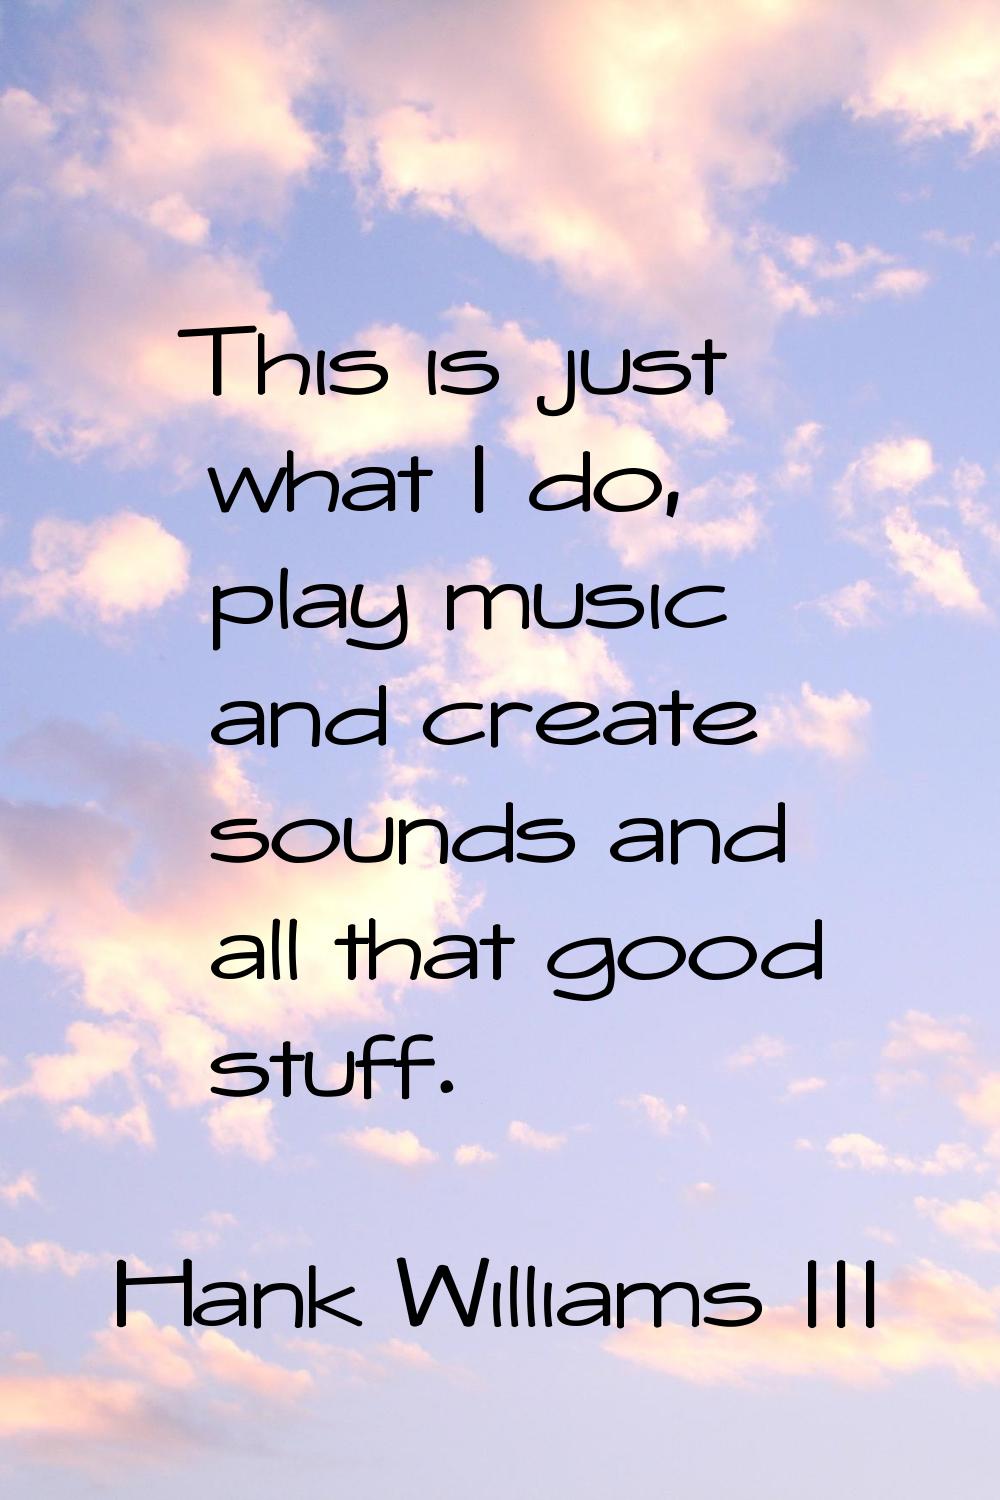 This is just what I do, play music and create sounds and all that good stuff.